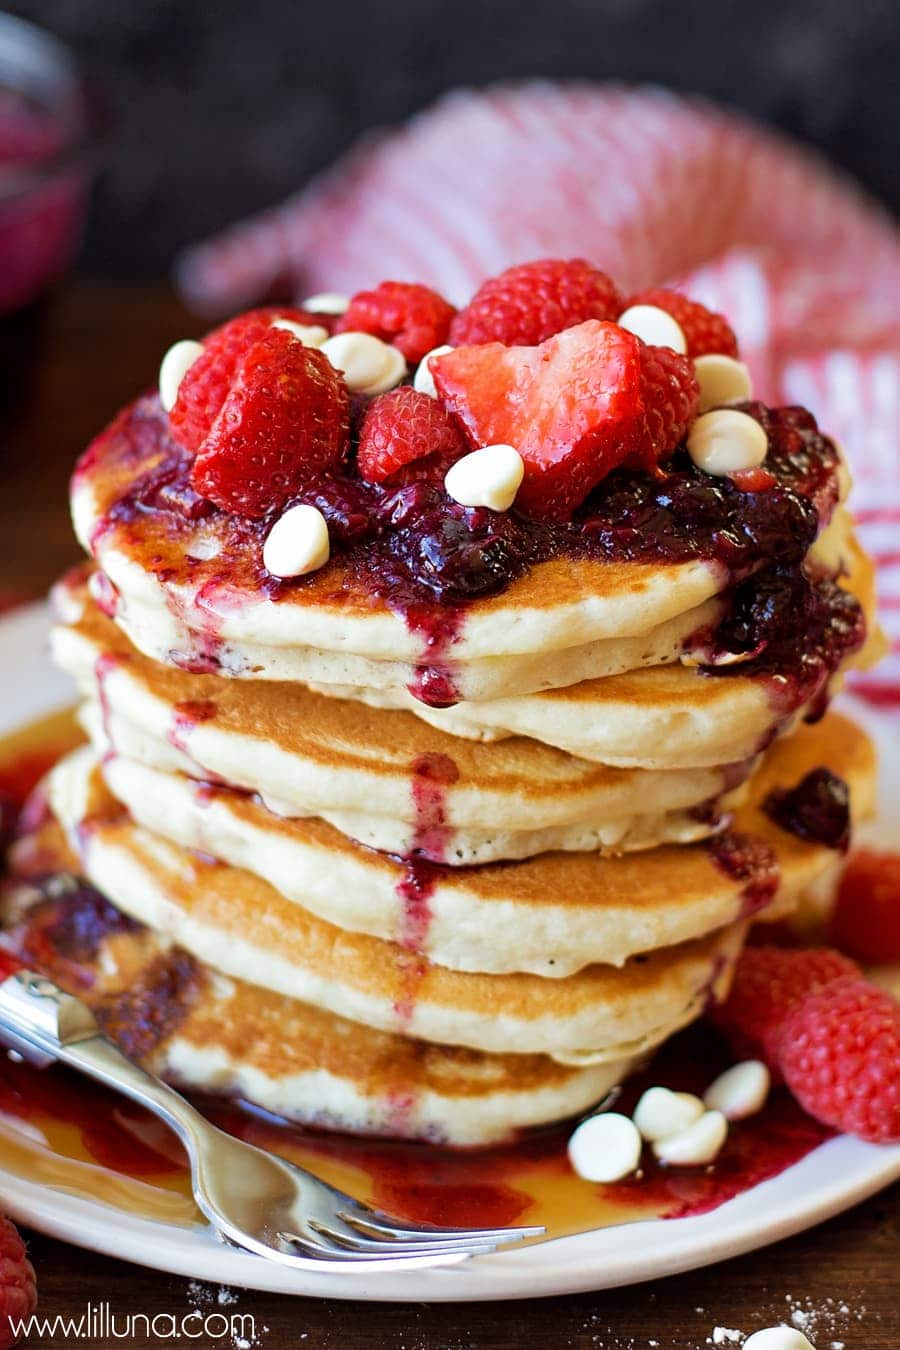 Breakfast for dinner - white chocolate berry pancakes stacked on a plate.